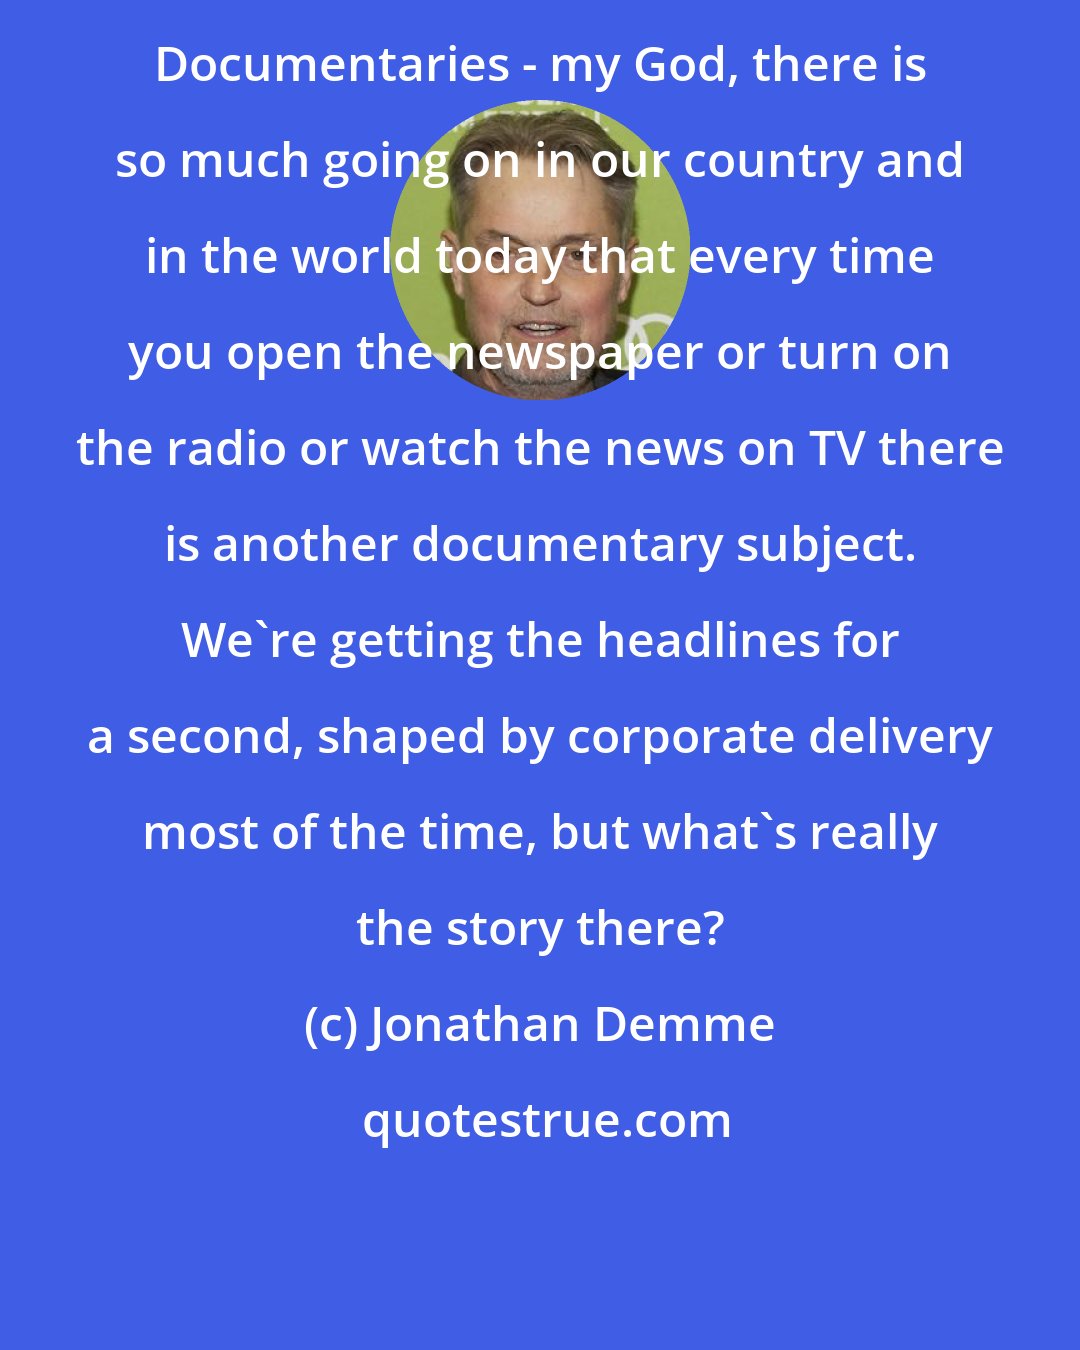 Jonathan Demme: Documentaries - my God, there is so much going on in our country and in the world today that every time you open the newspaper or turn on the radio or watch the news on TV there is another documentary subject. We're getting the headlines for a second, shaped by corporate delivery most of the time, but what's really the story there?